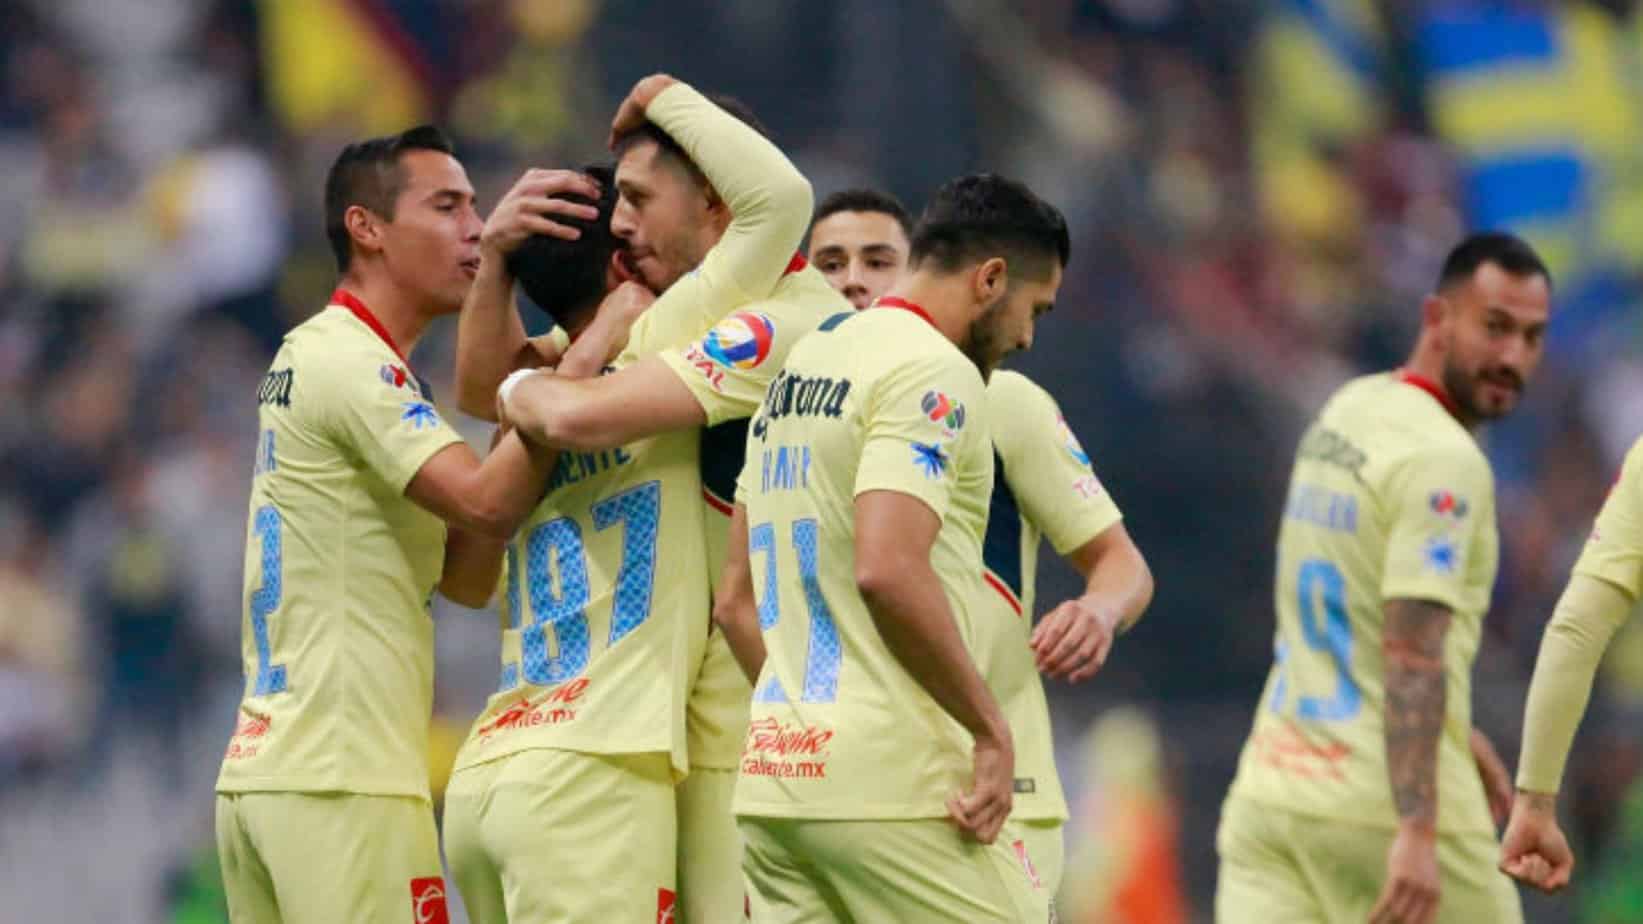 Liga MX Matchday 4 – Preview and Free Picks